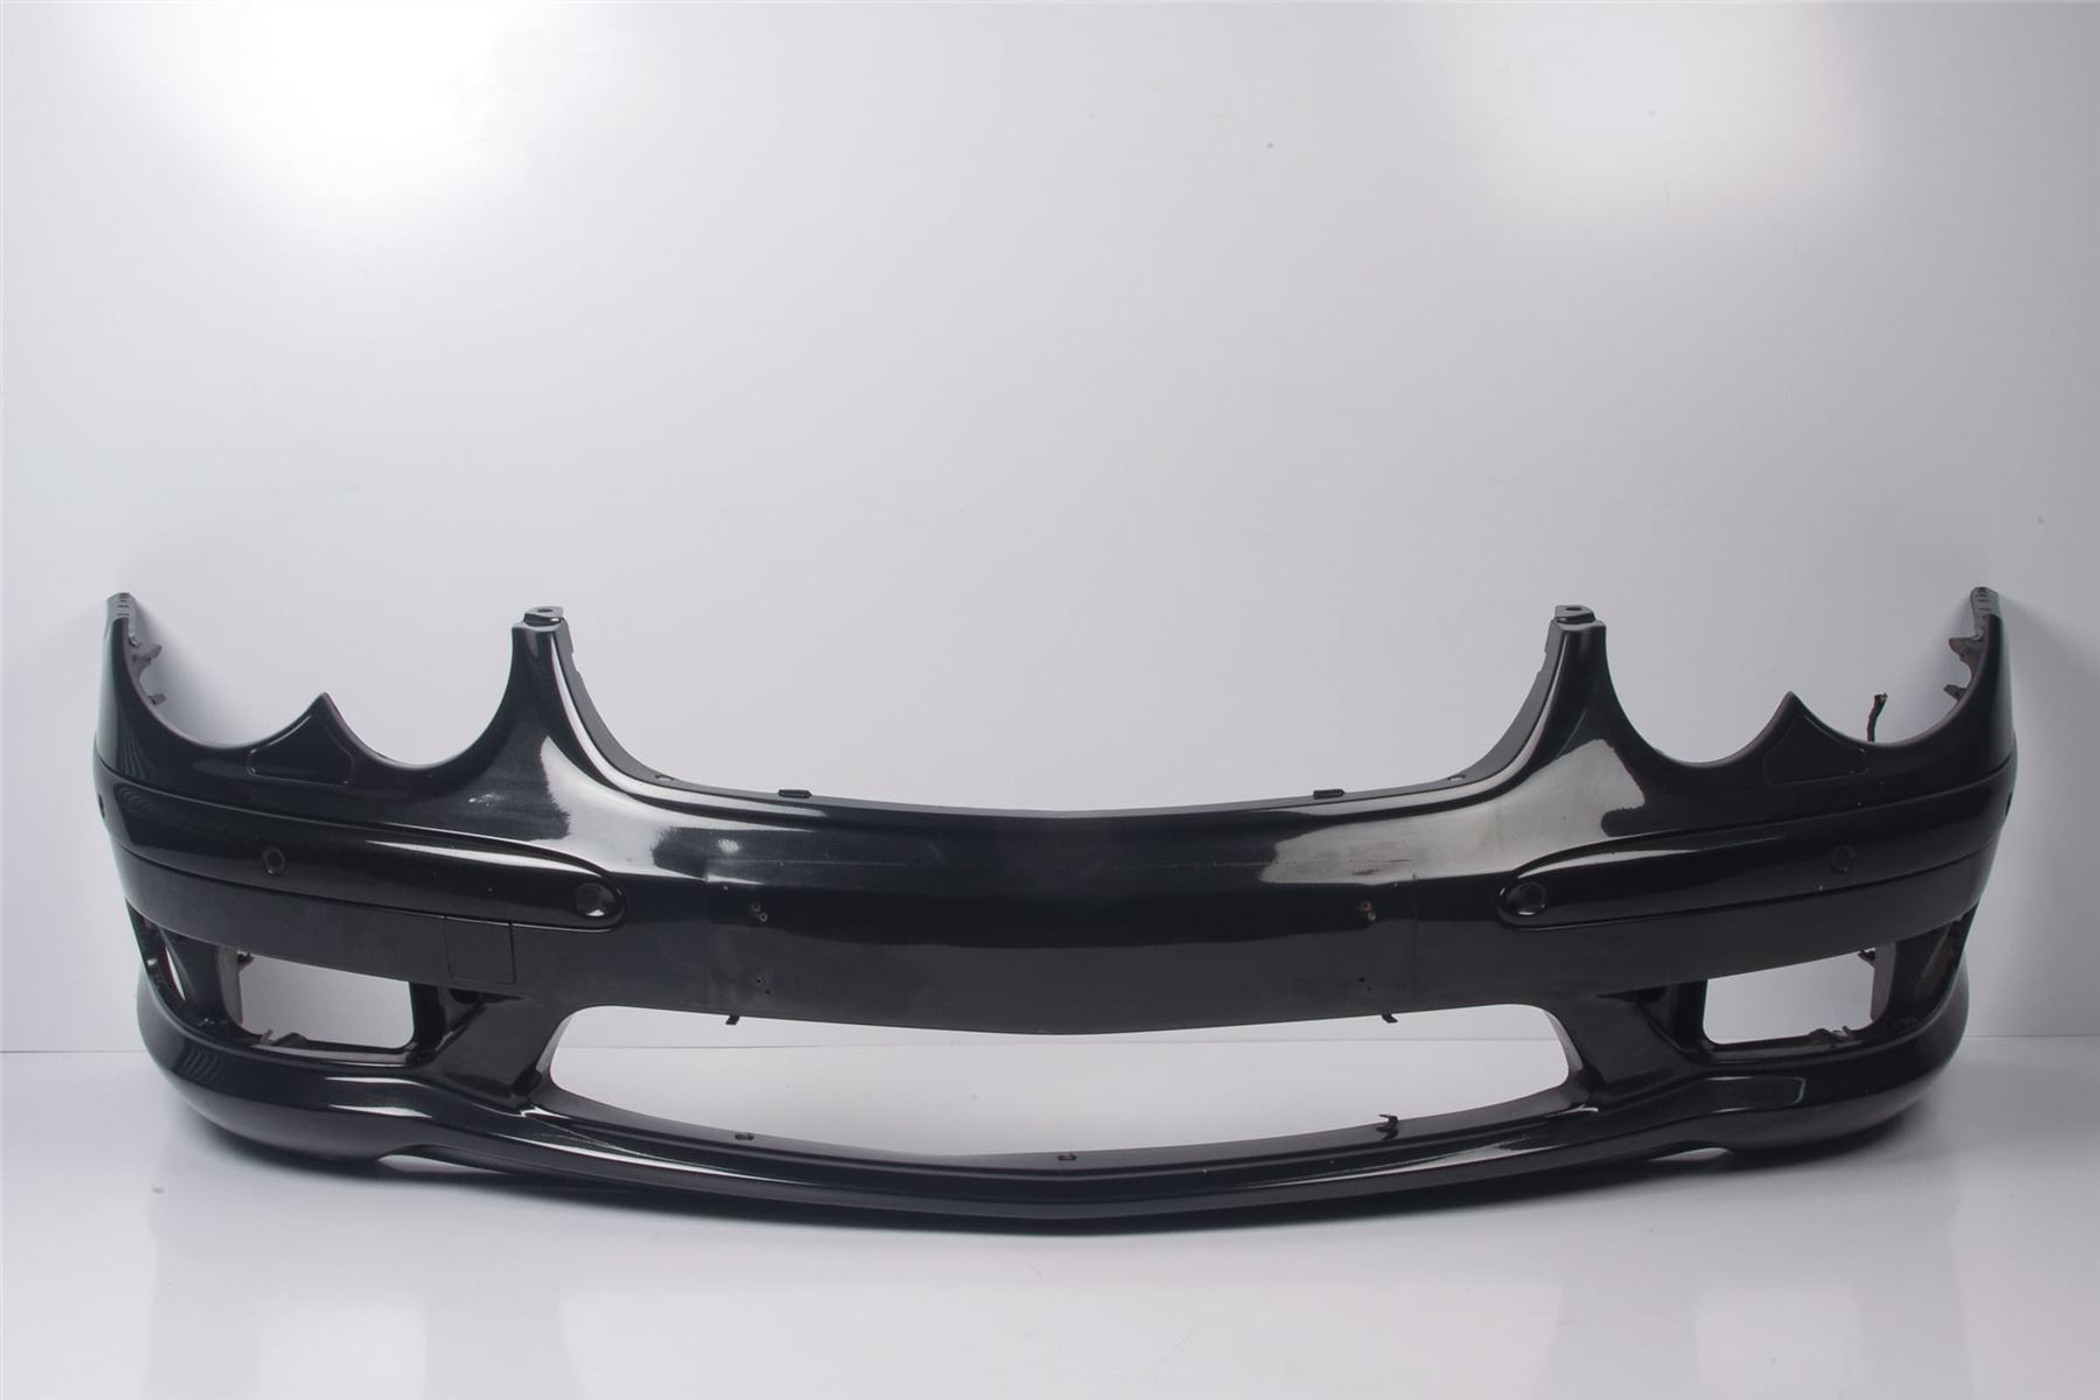 Mercedes-Benz - Exterior Parts & Accessories - Bumpers & Components - Page  1 - The R129 Co